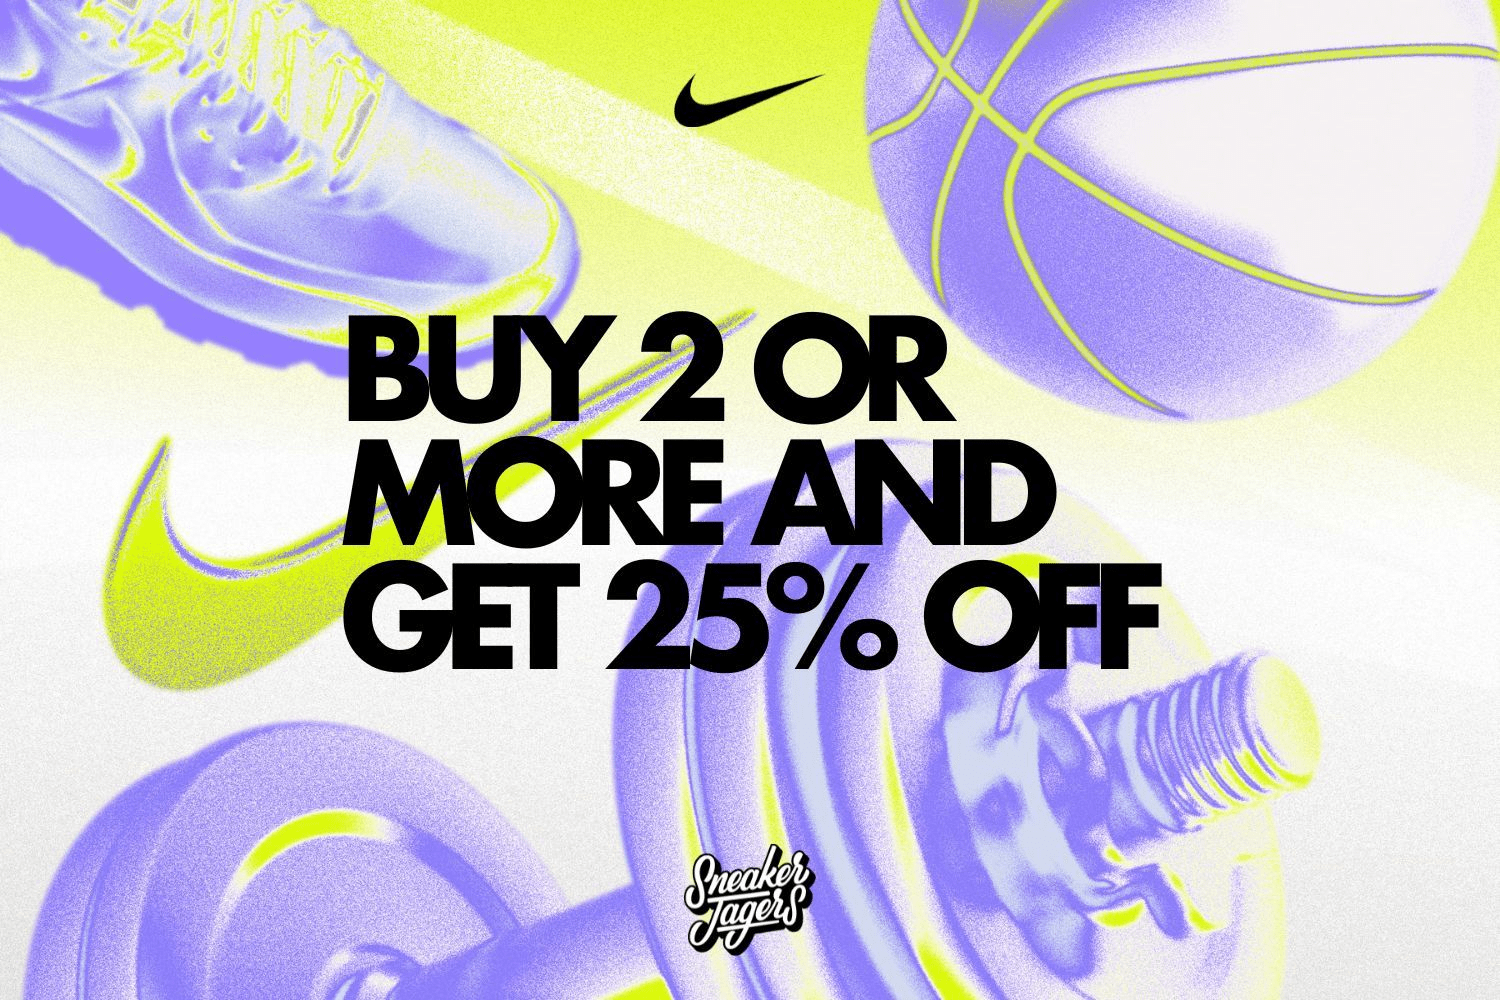 Enjoy 25% off the Nike winter collection